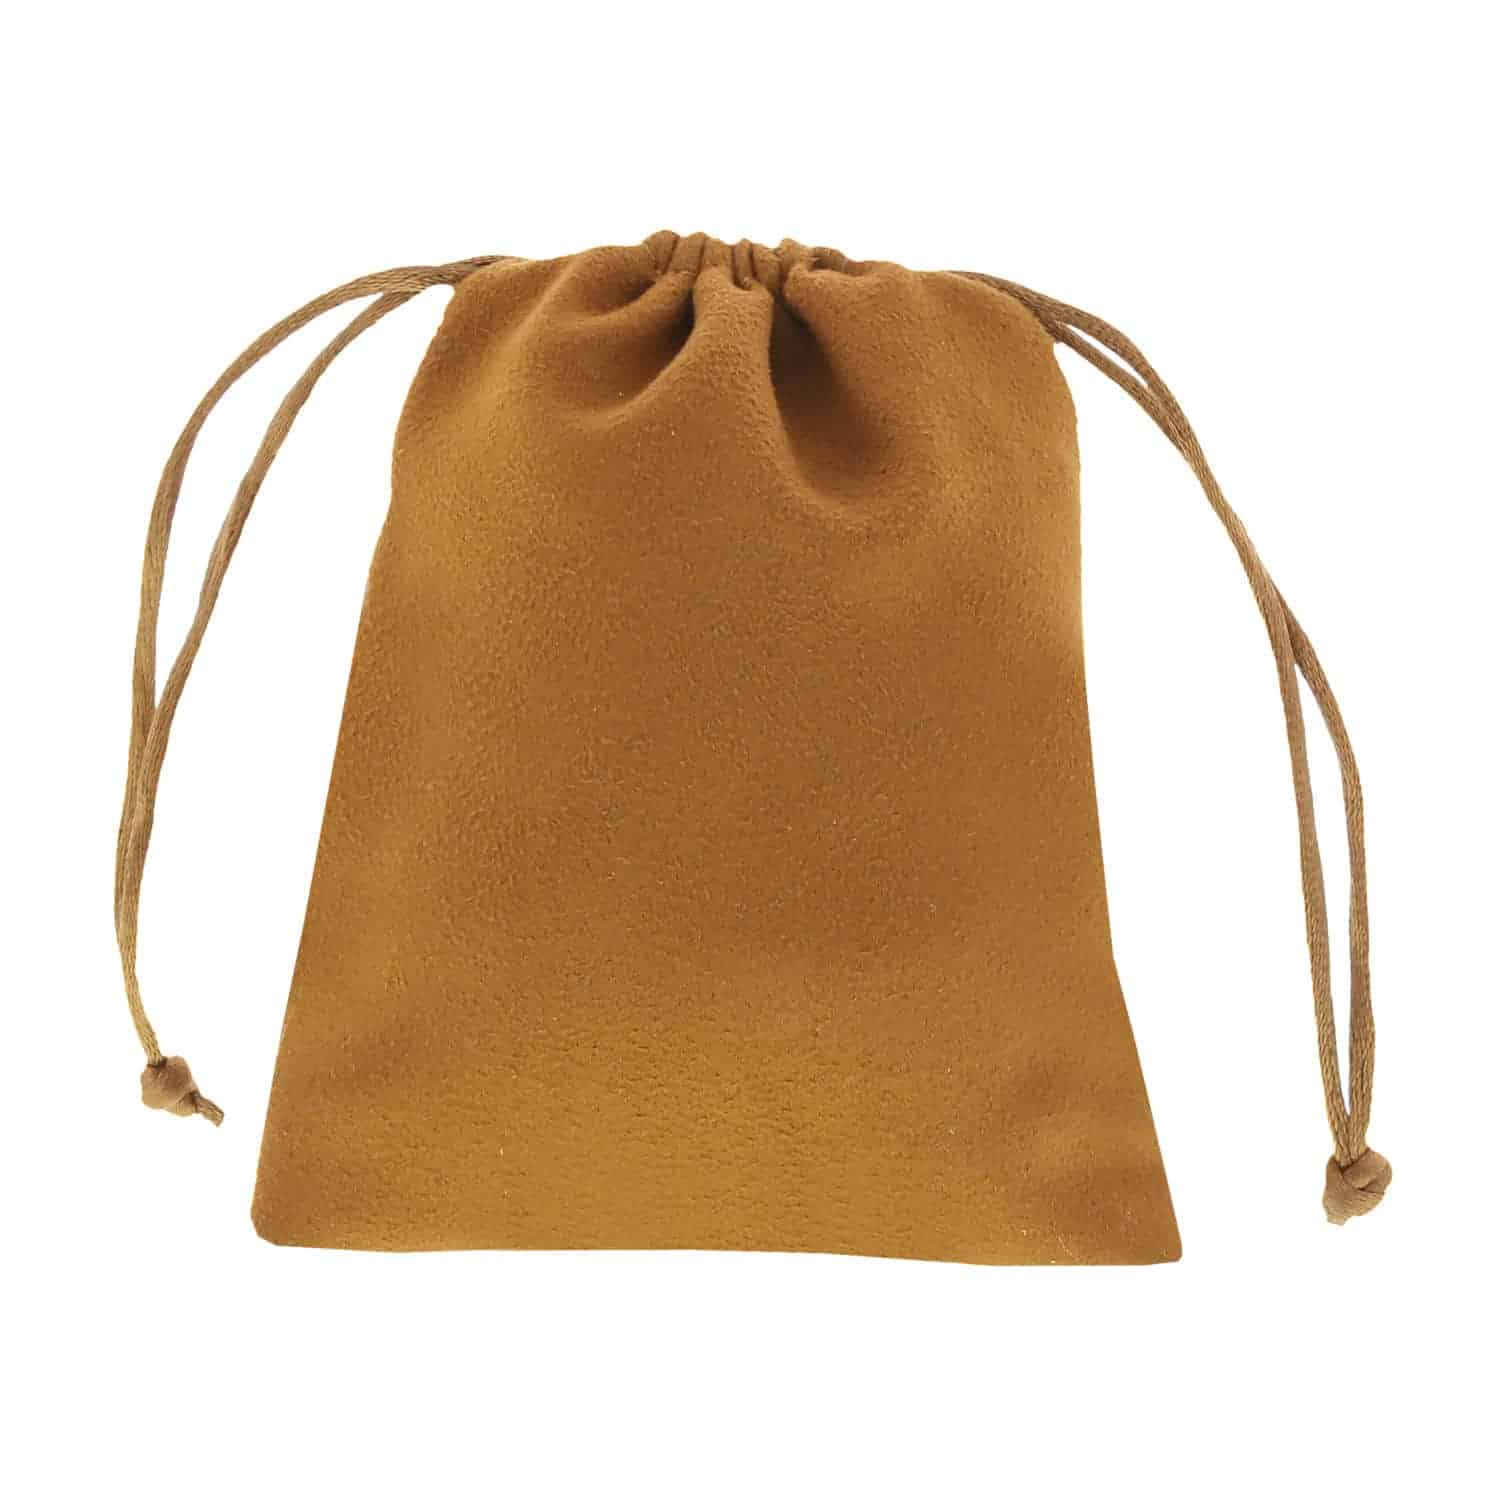 suede pouch camel brown 9,5x11,5 3.0